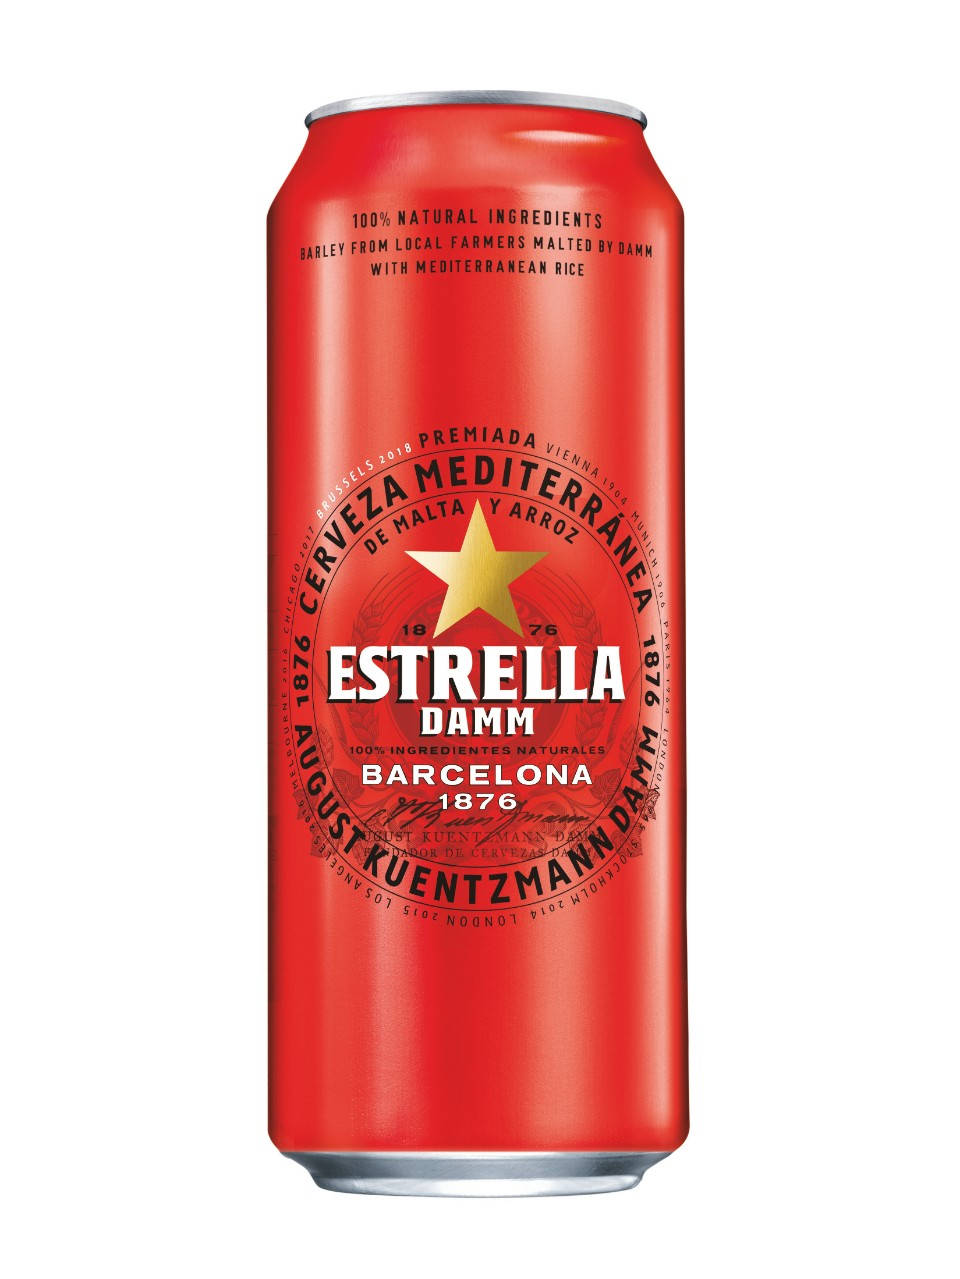 Fresh Estrella Damm Lager Beer in Vibrant Red Can Wallpaper